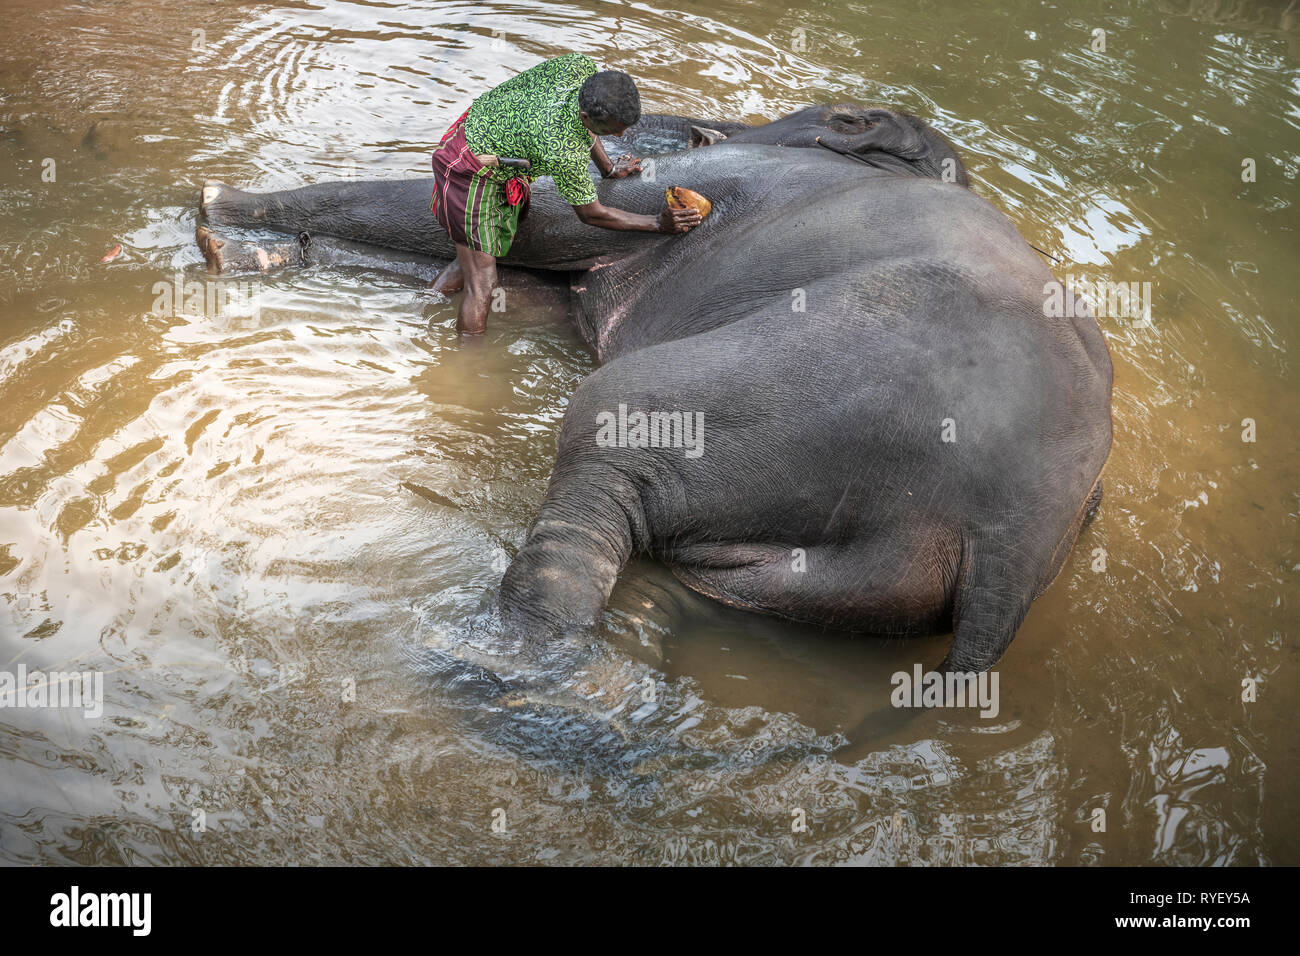 In searing heat, a Sri Lankan elephant enjoys laying down in the cool waters of a river as his Mahout scrubs it down with a coconut husk. Stock Photo